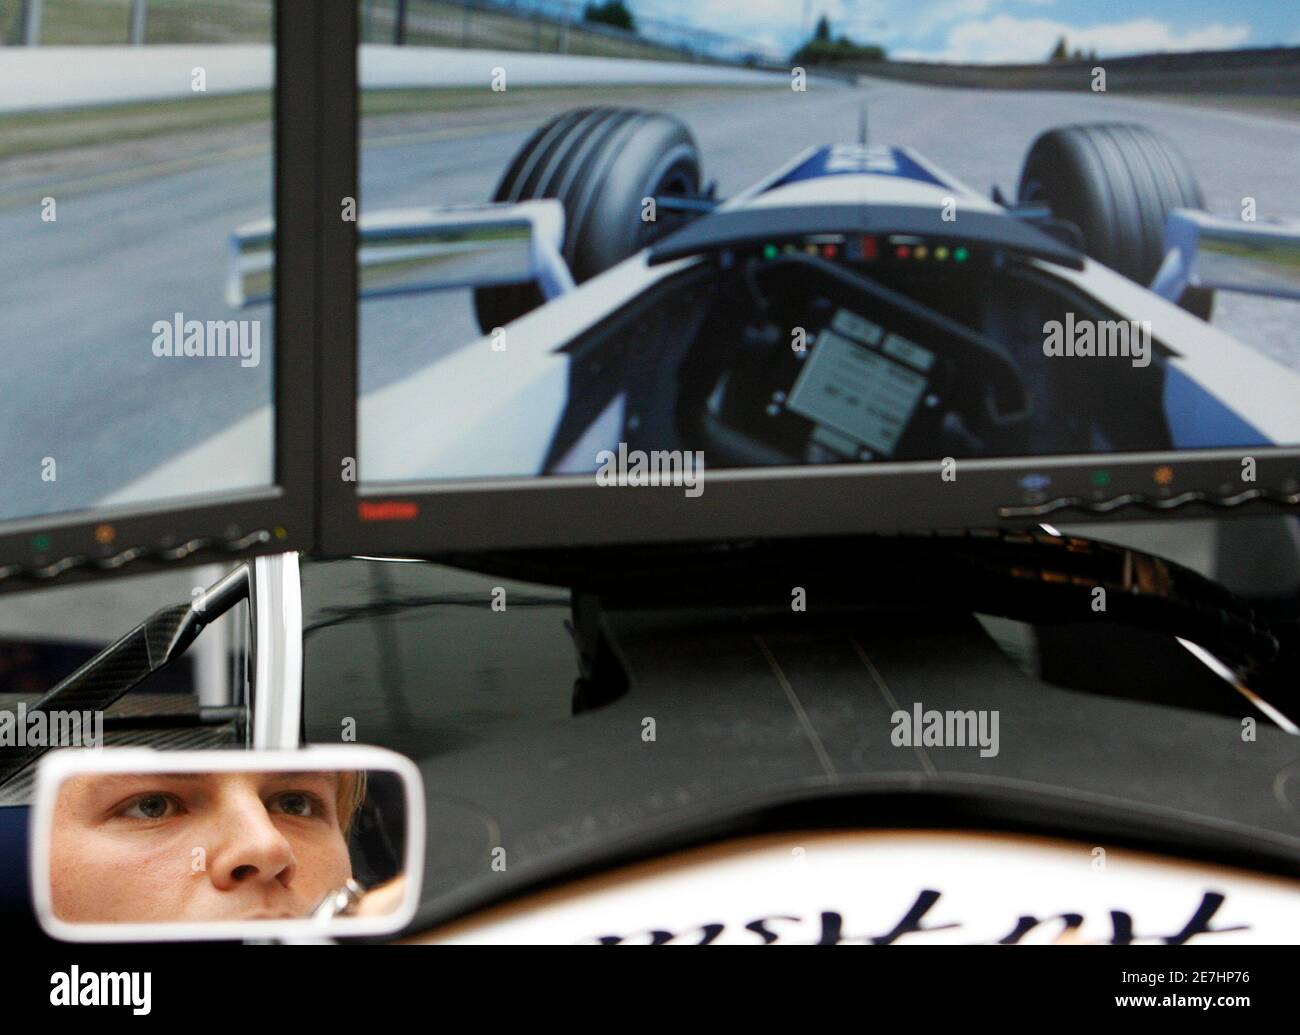 Williams Formula One driver Nico Rosberg of Germany is reflected in a wing mirror as he drives an F1 simulator in Singapore March 18, 2008.  REUTERS/Vivek Prakash (SINGAPORE) Stock Photo